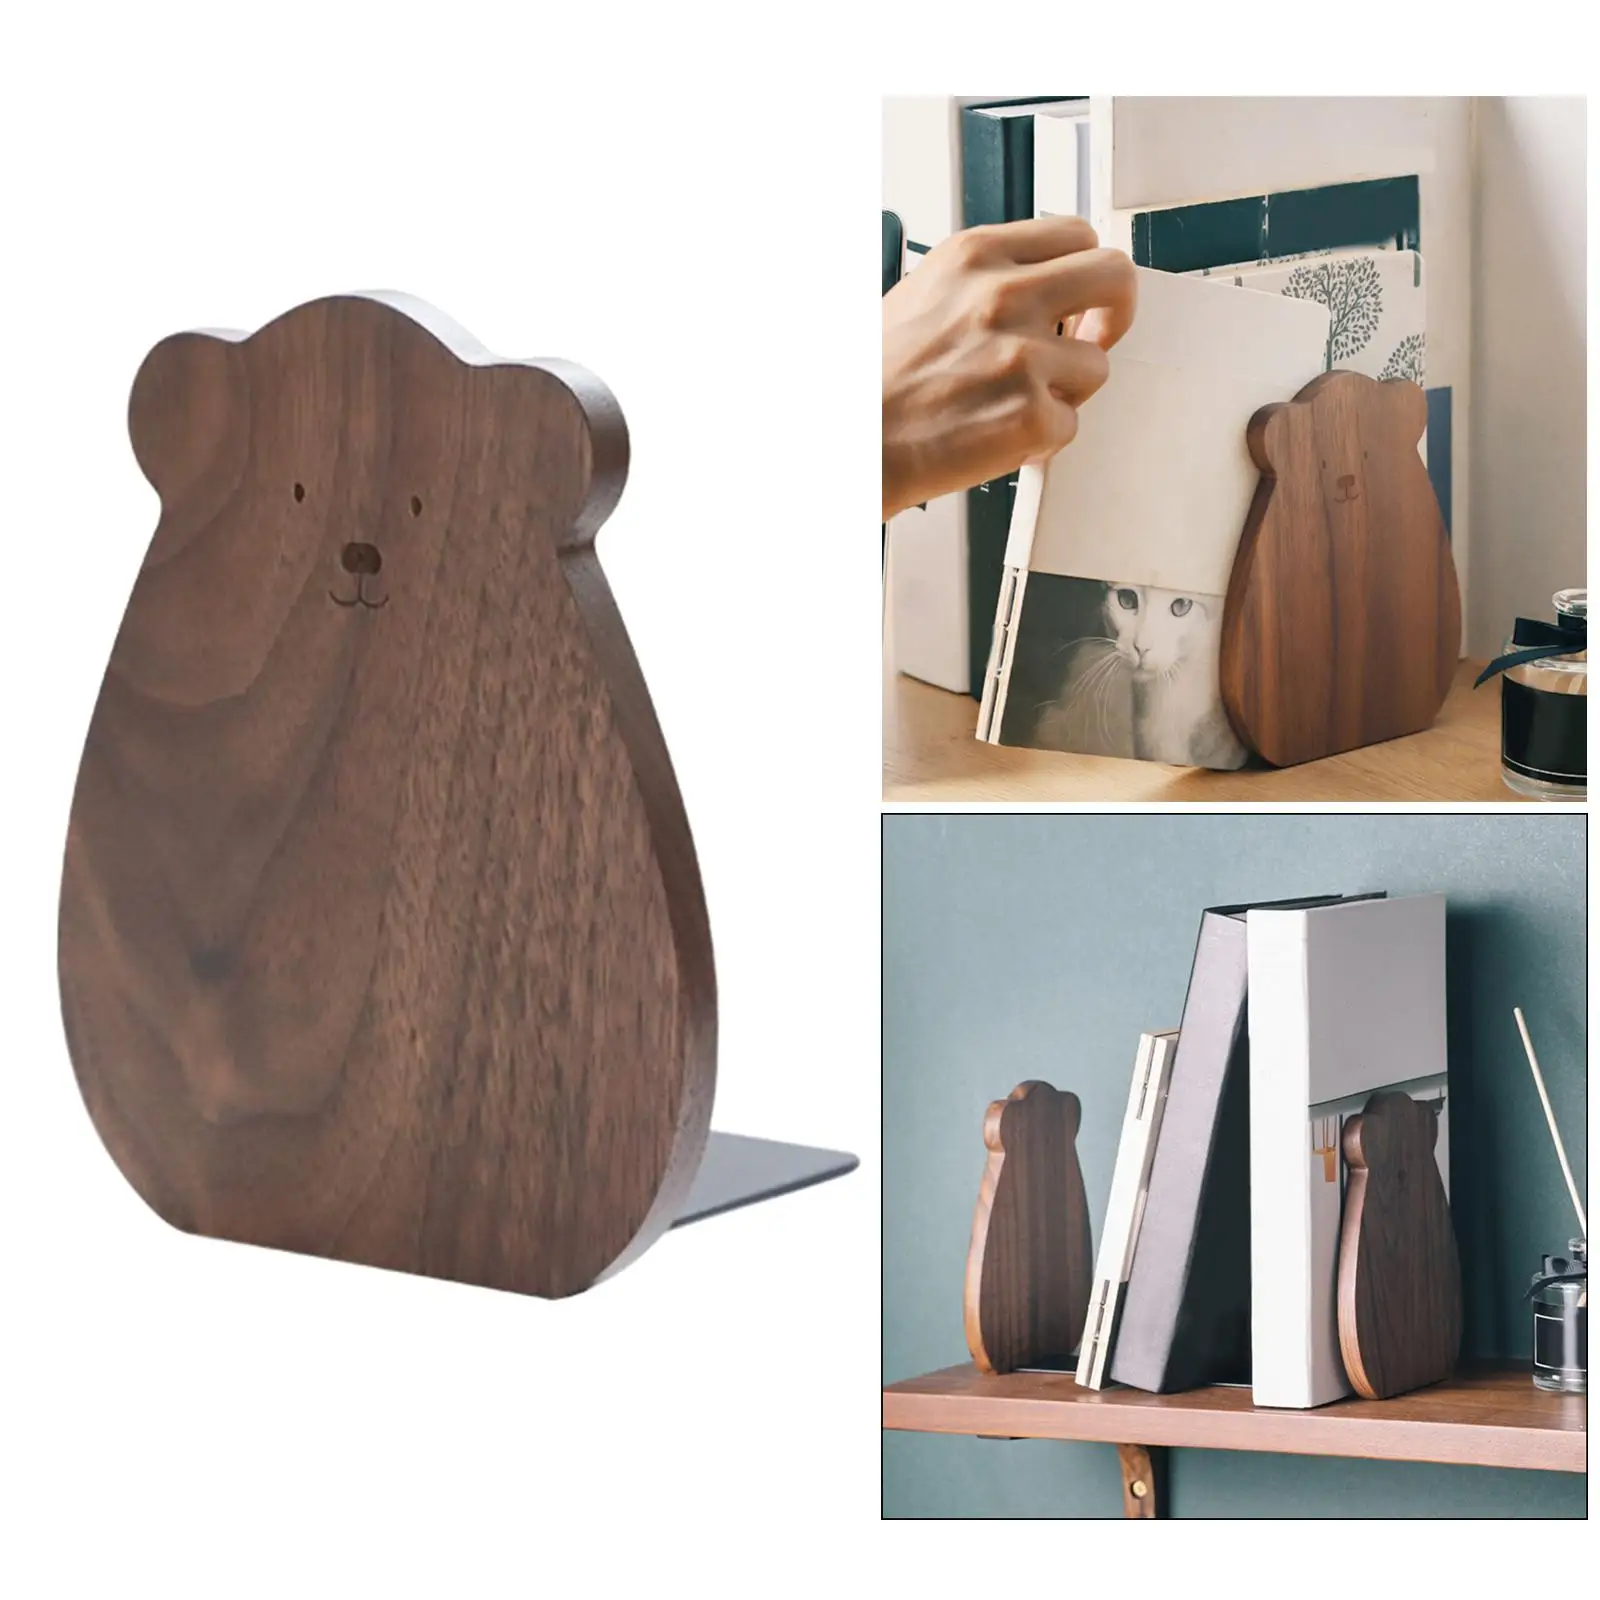 

Simple Wooden Bookend Book Support Holder Bookshelf Book Stopper Organizer Decoration Decorative for Bedroom Home Room Magazines